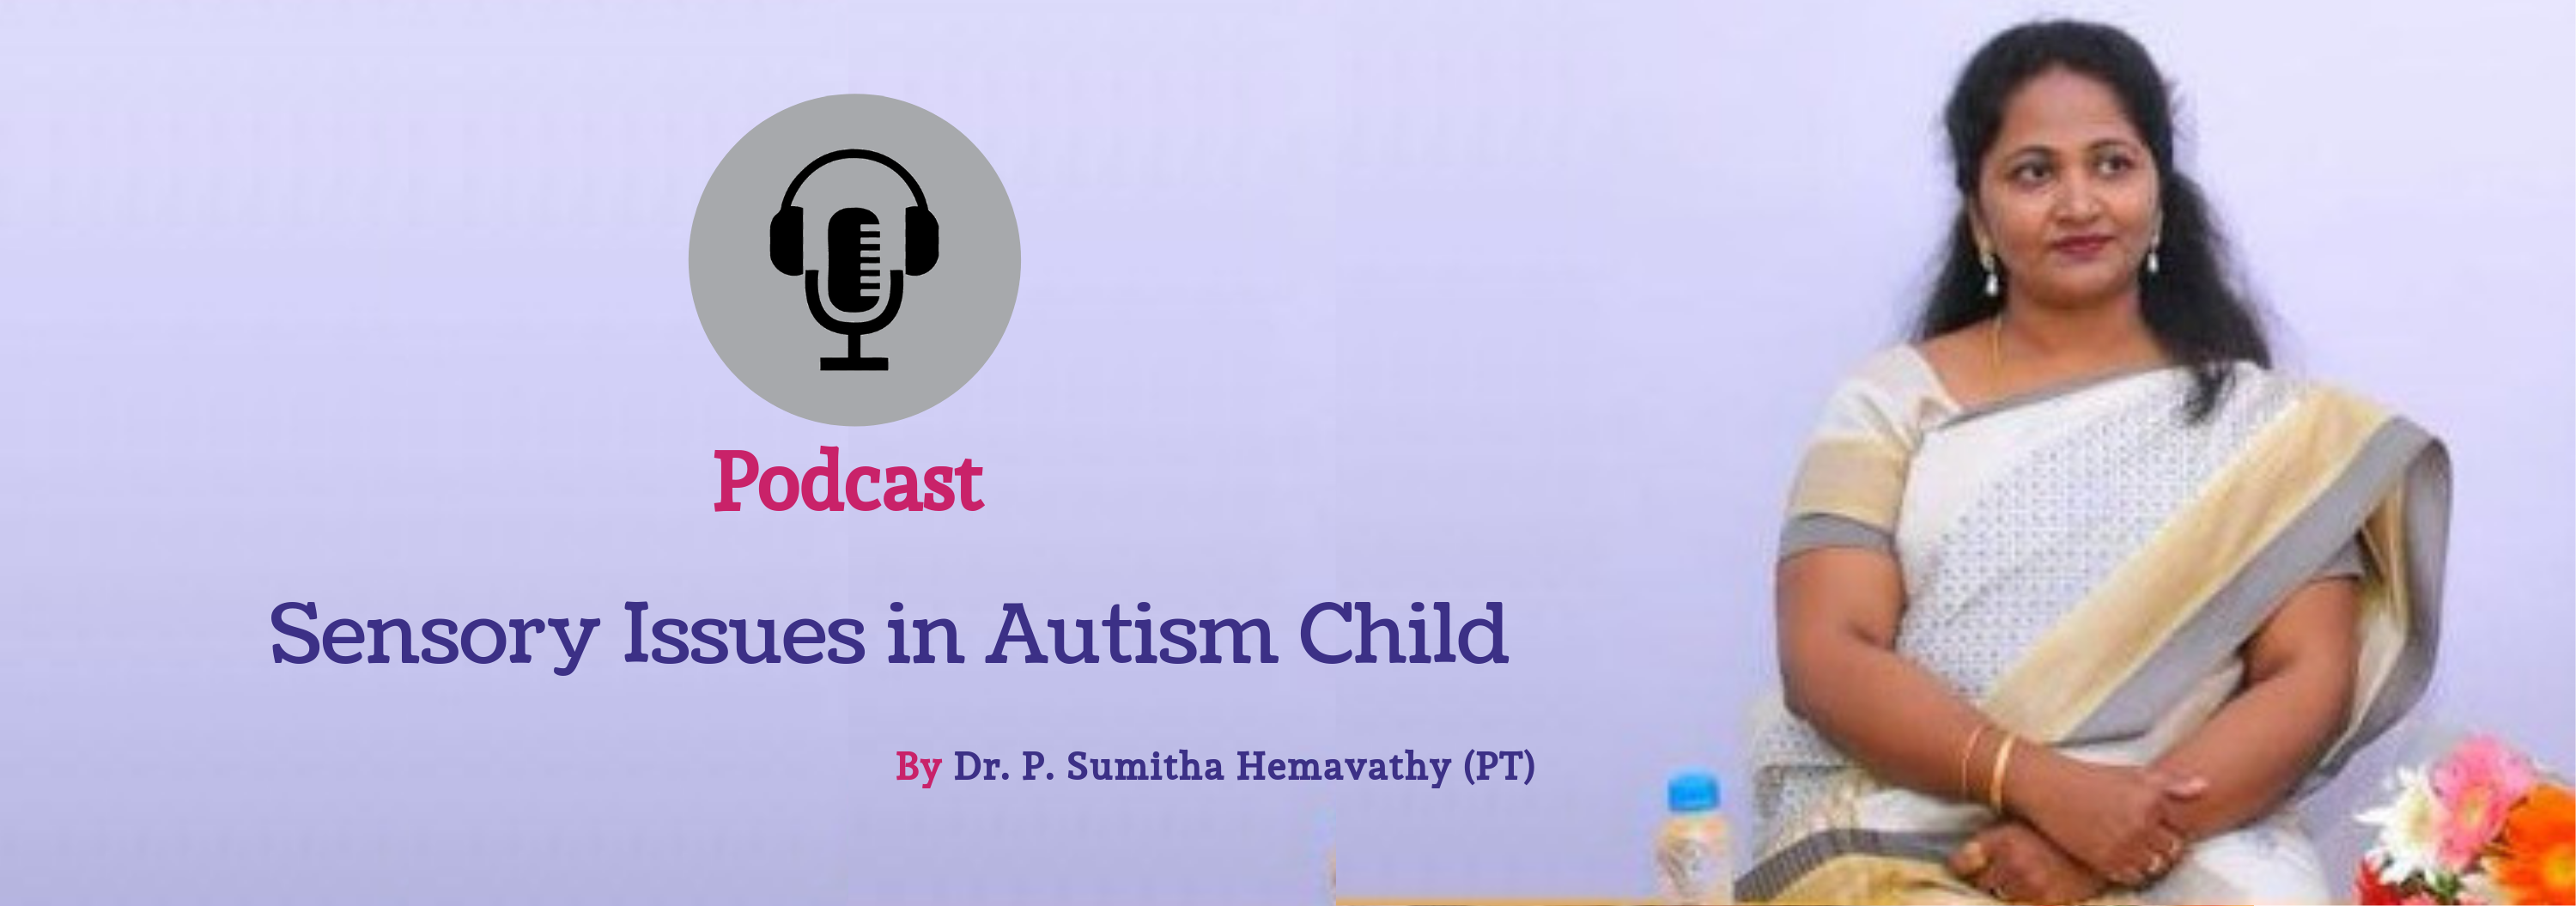 Sensory Issues in Autism Child